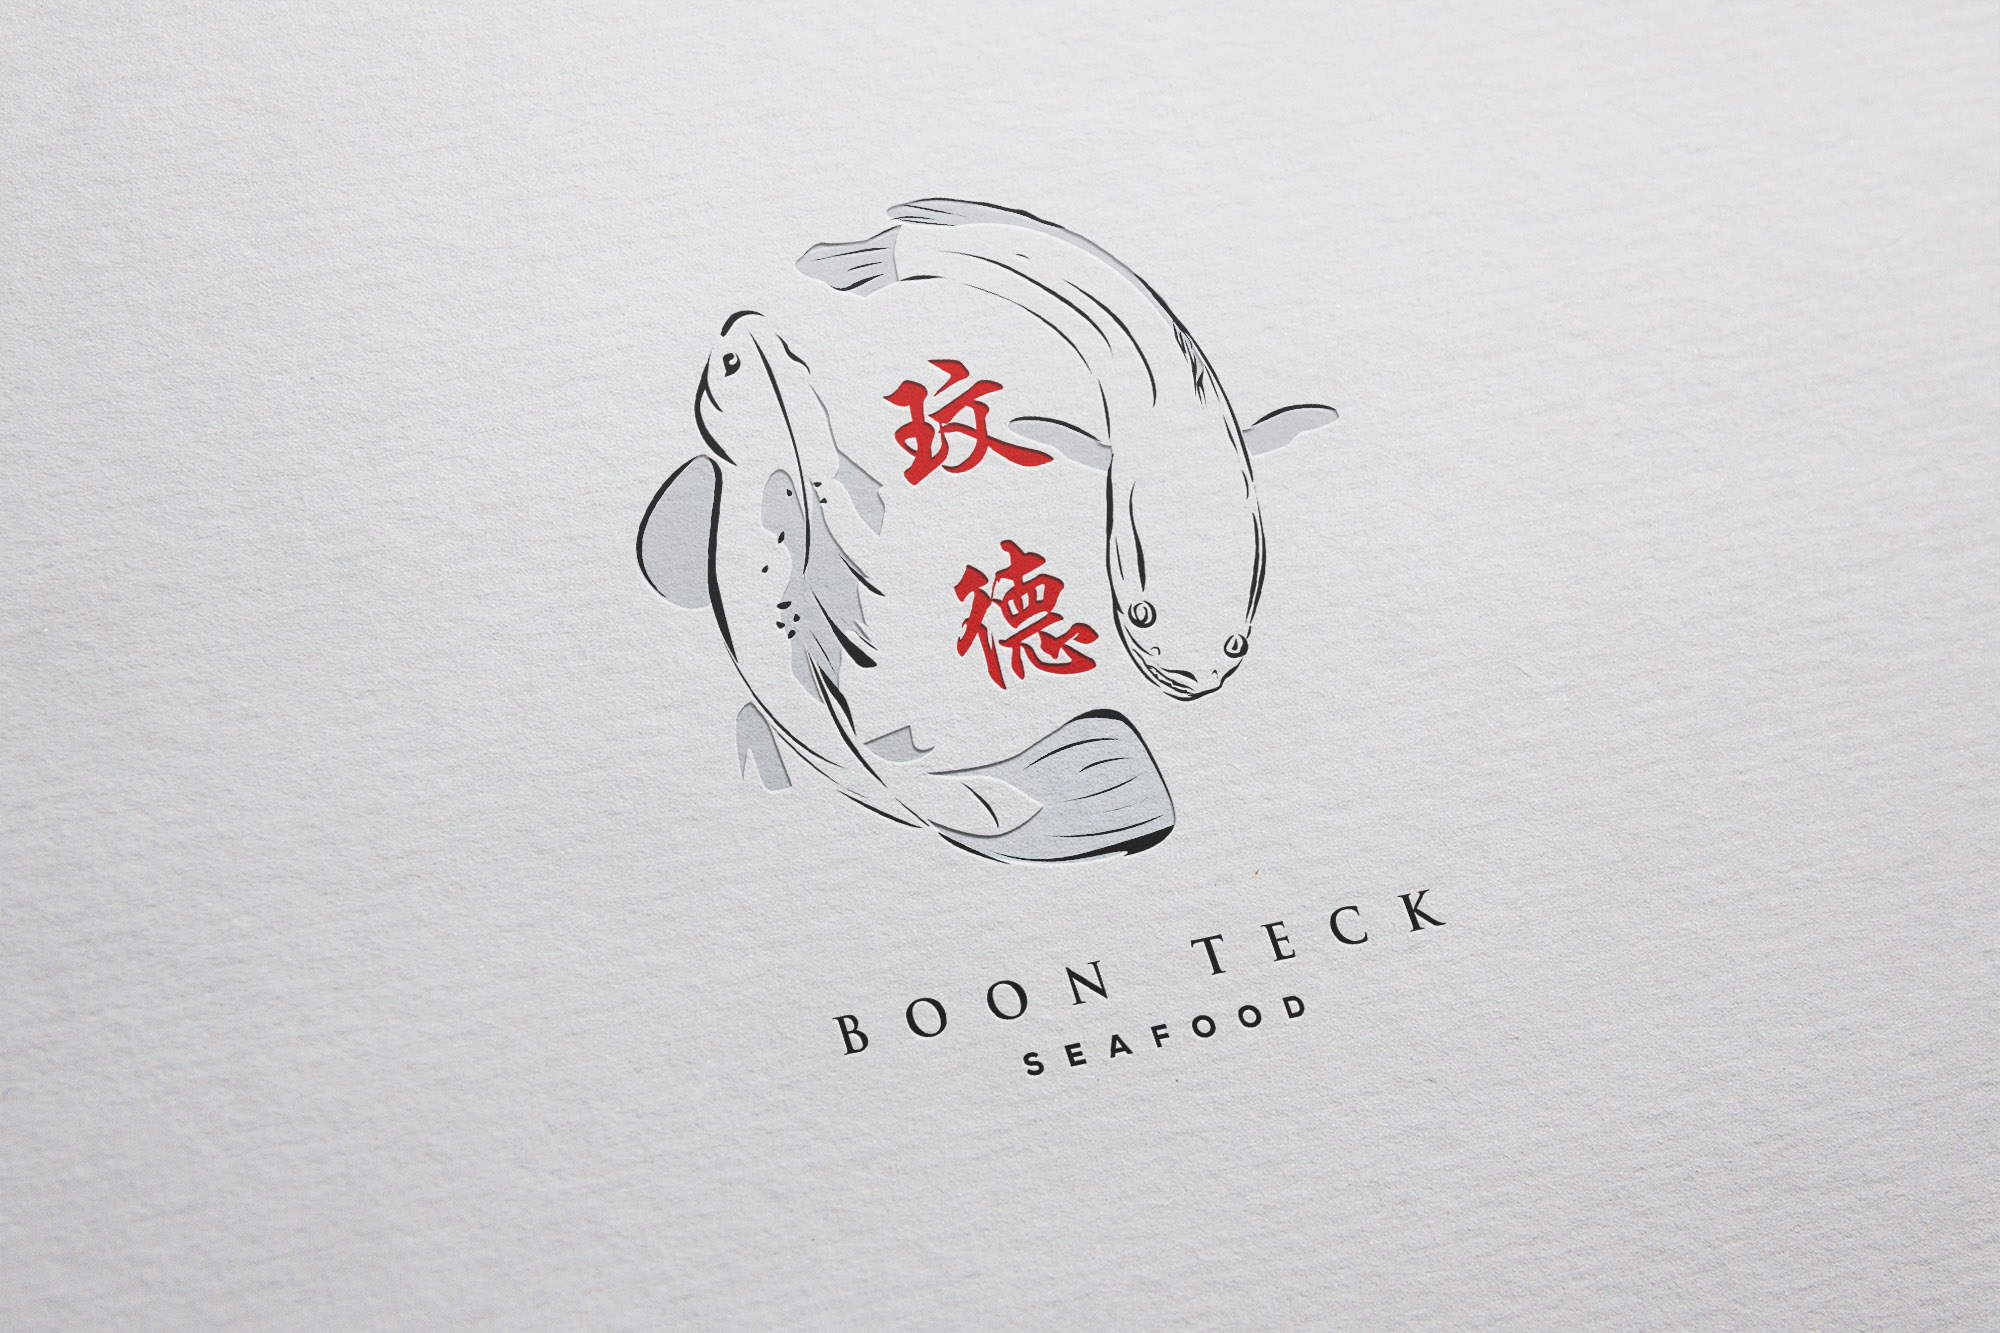 A logo design for boon teck seafood